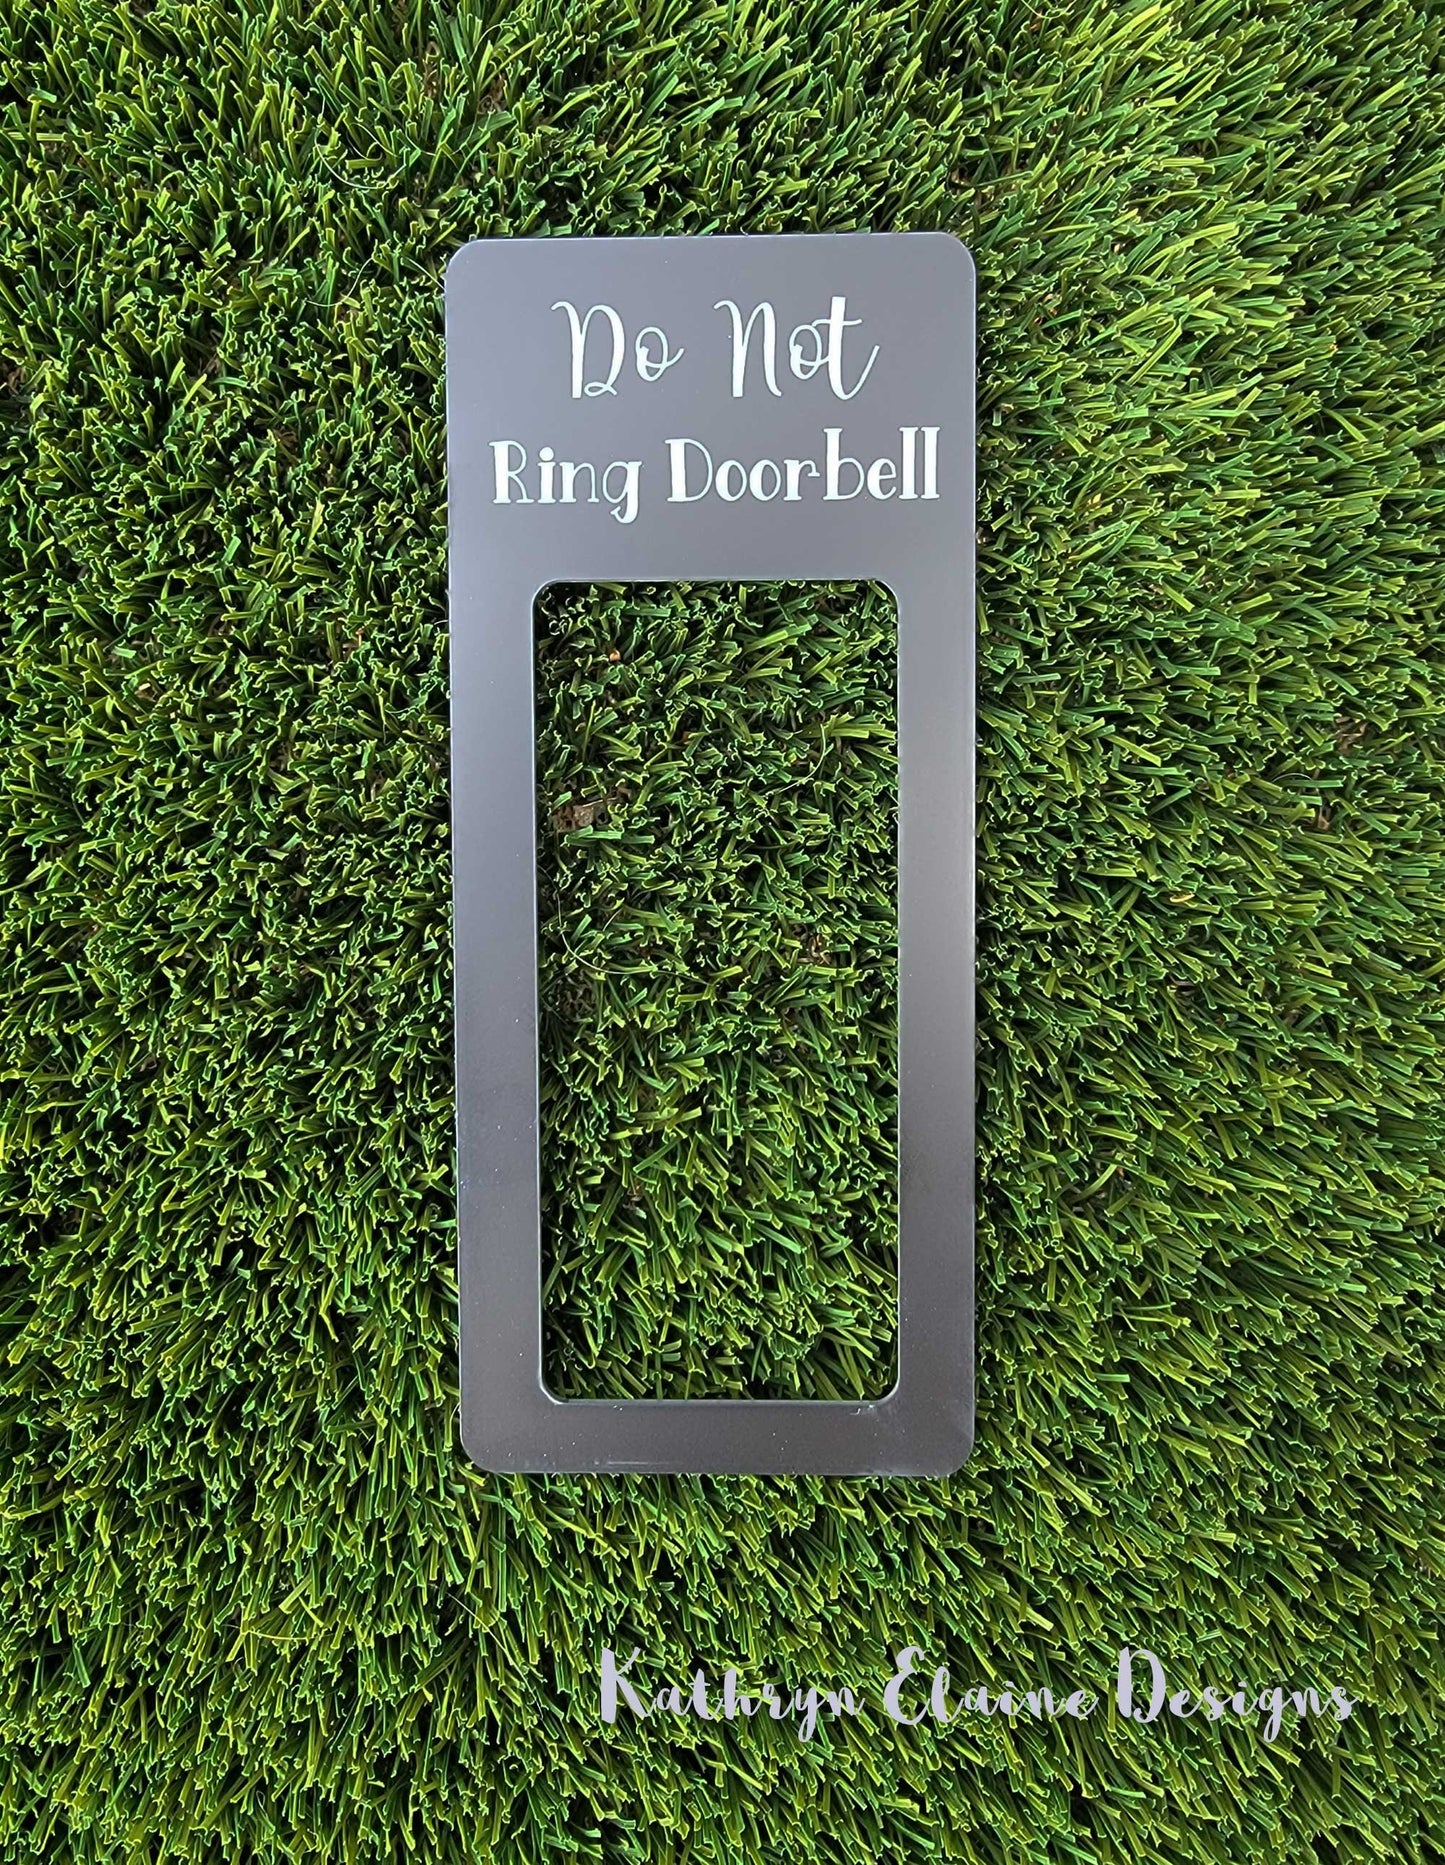 Black laminate doorbell surround with white lettering stating Do Not Ring Doorbell on grass background